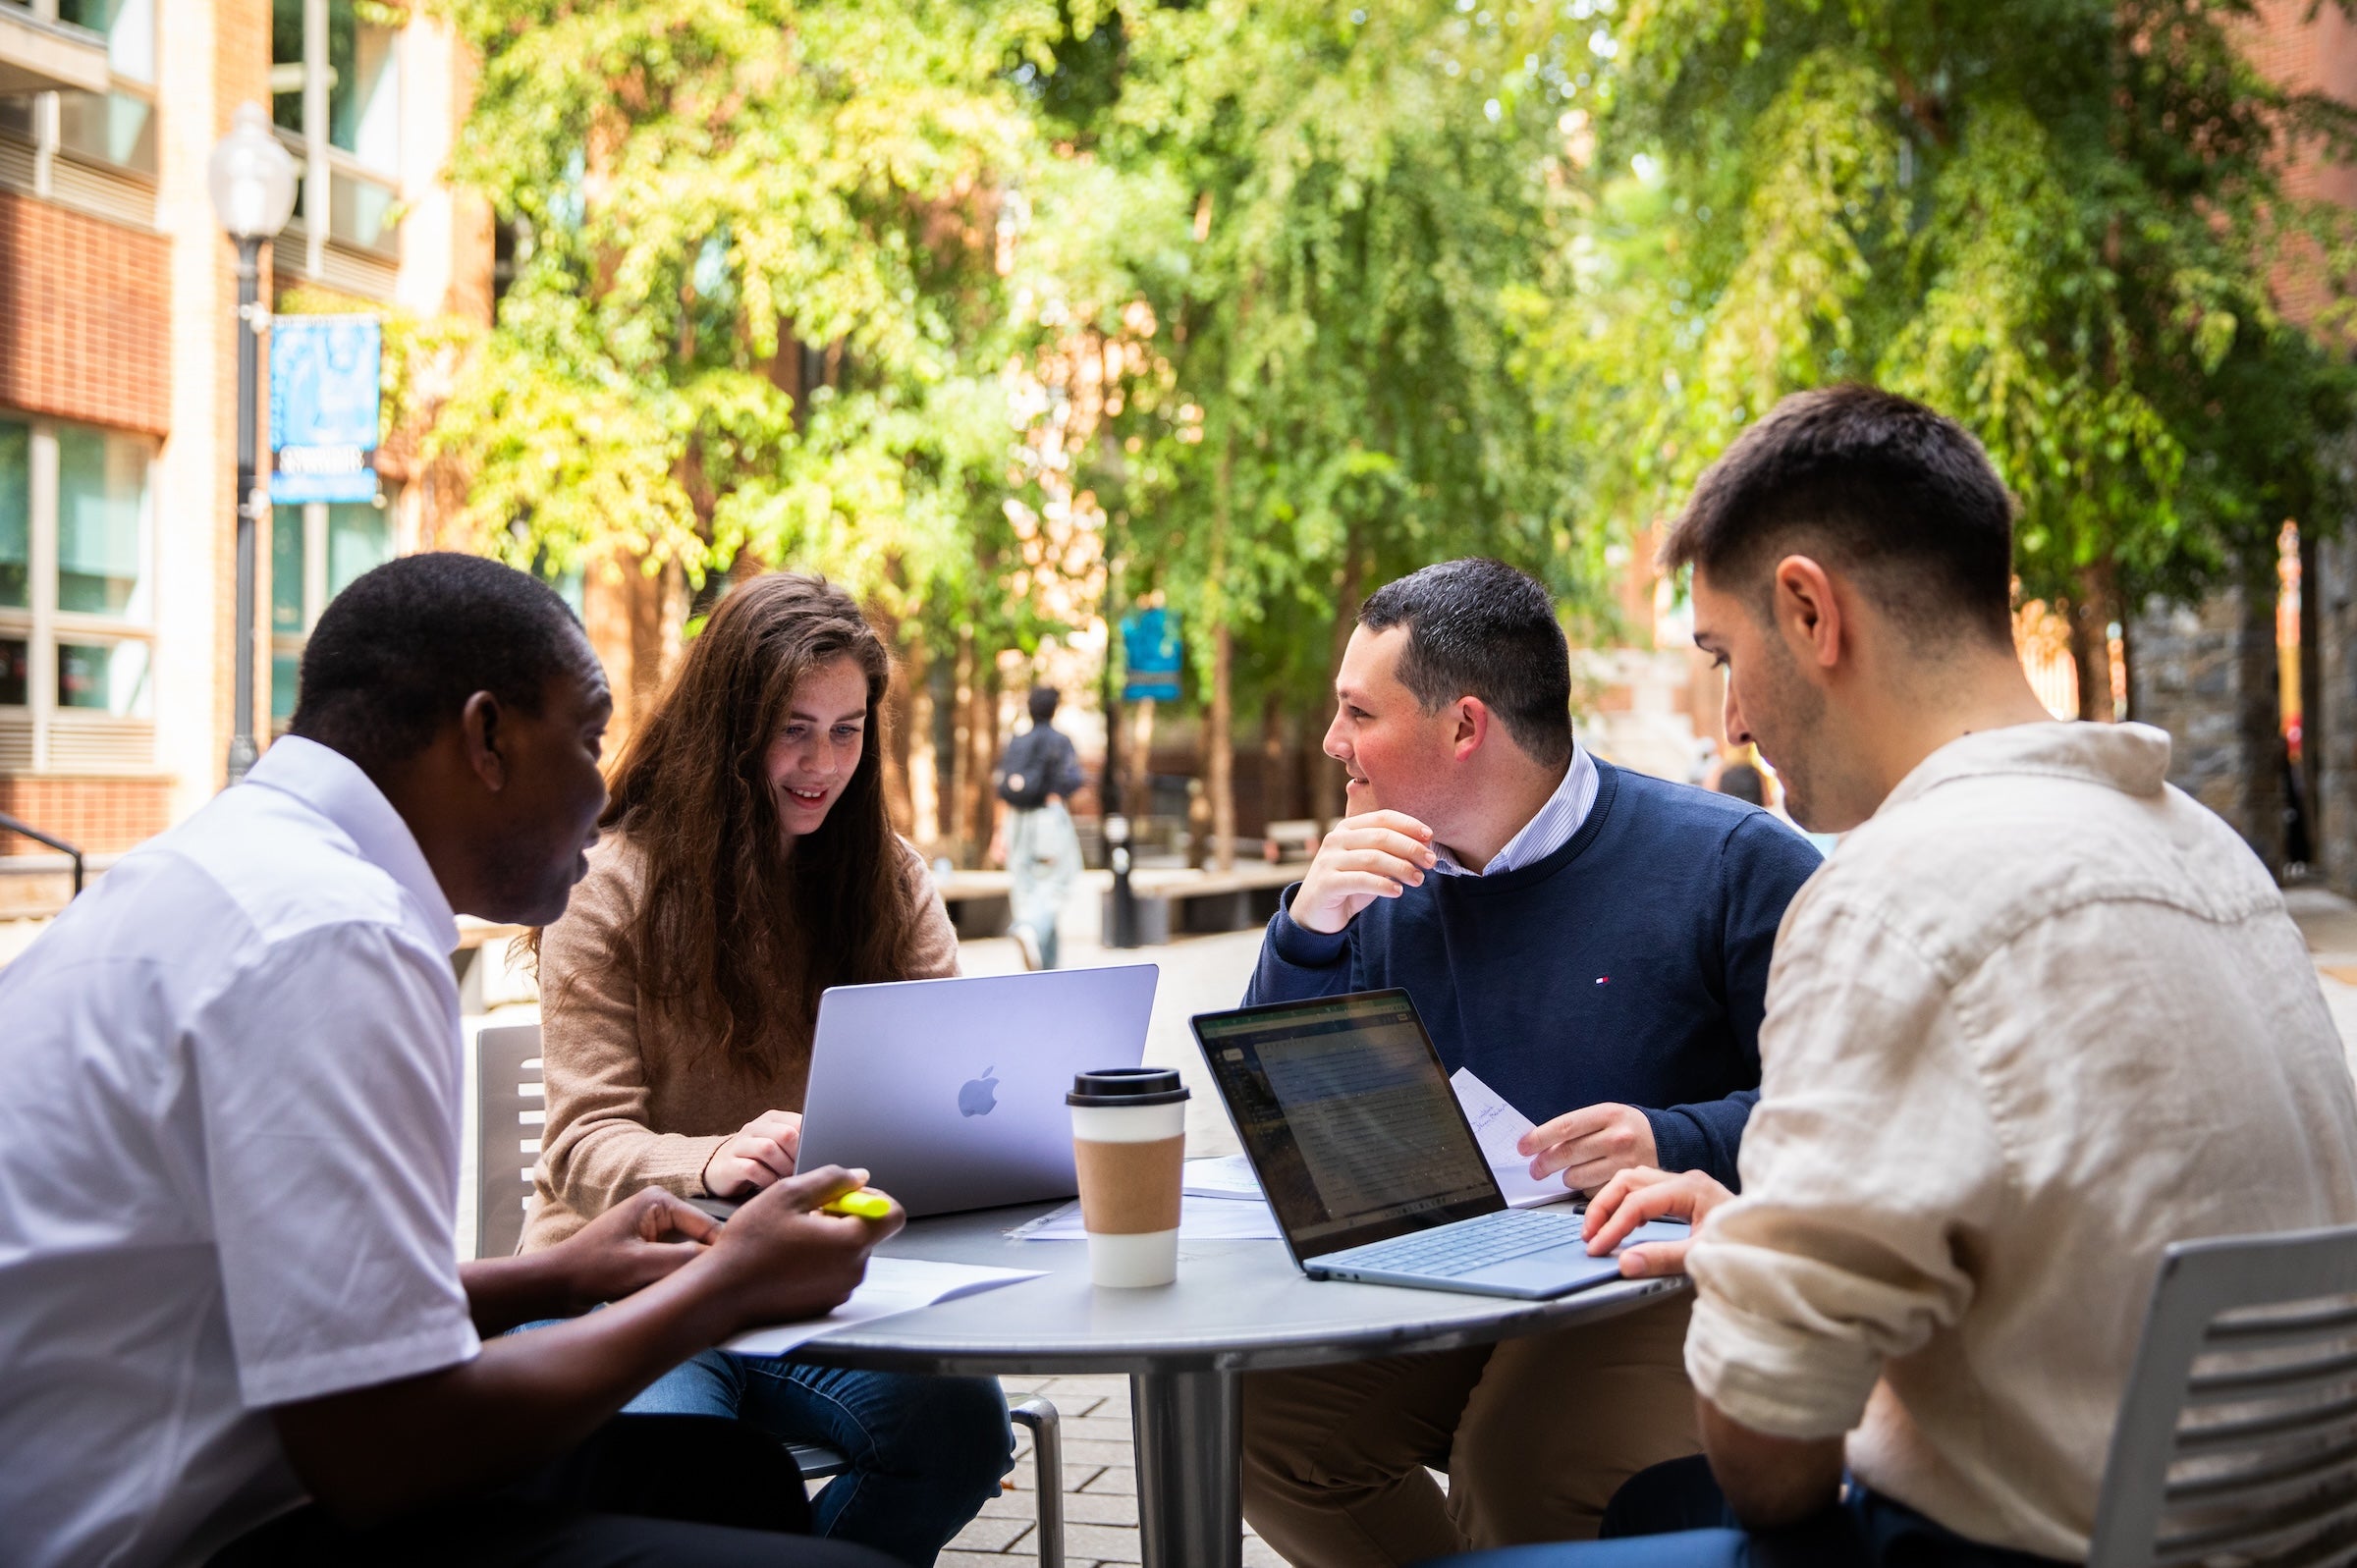 Four students studying together at a table outside with laptops